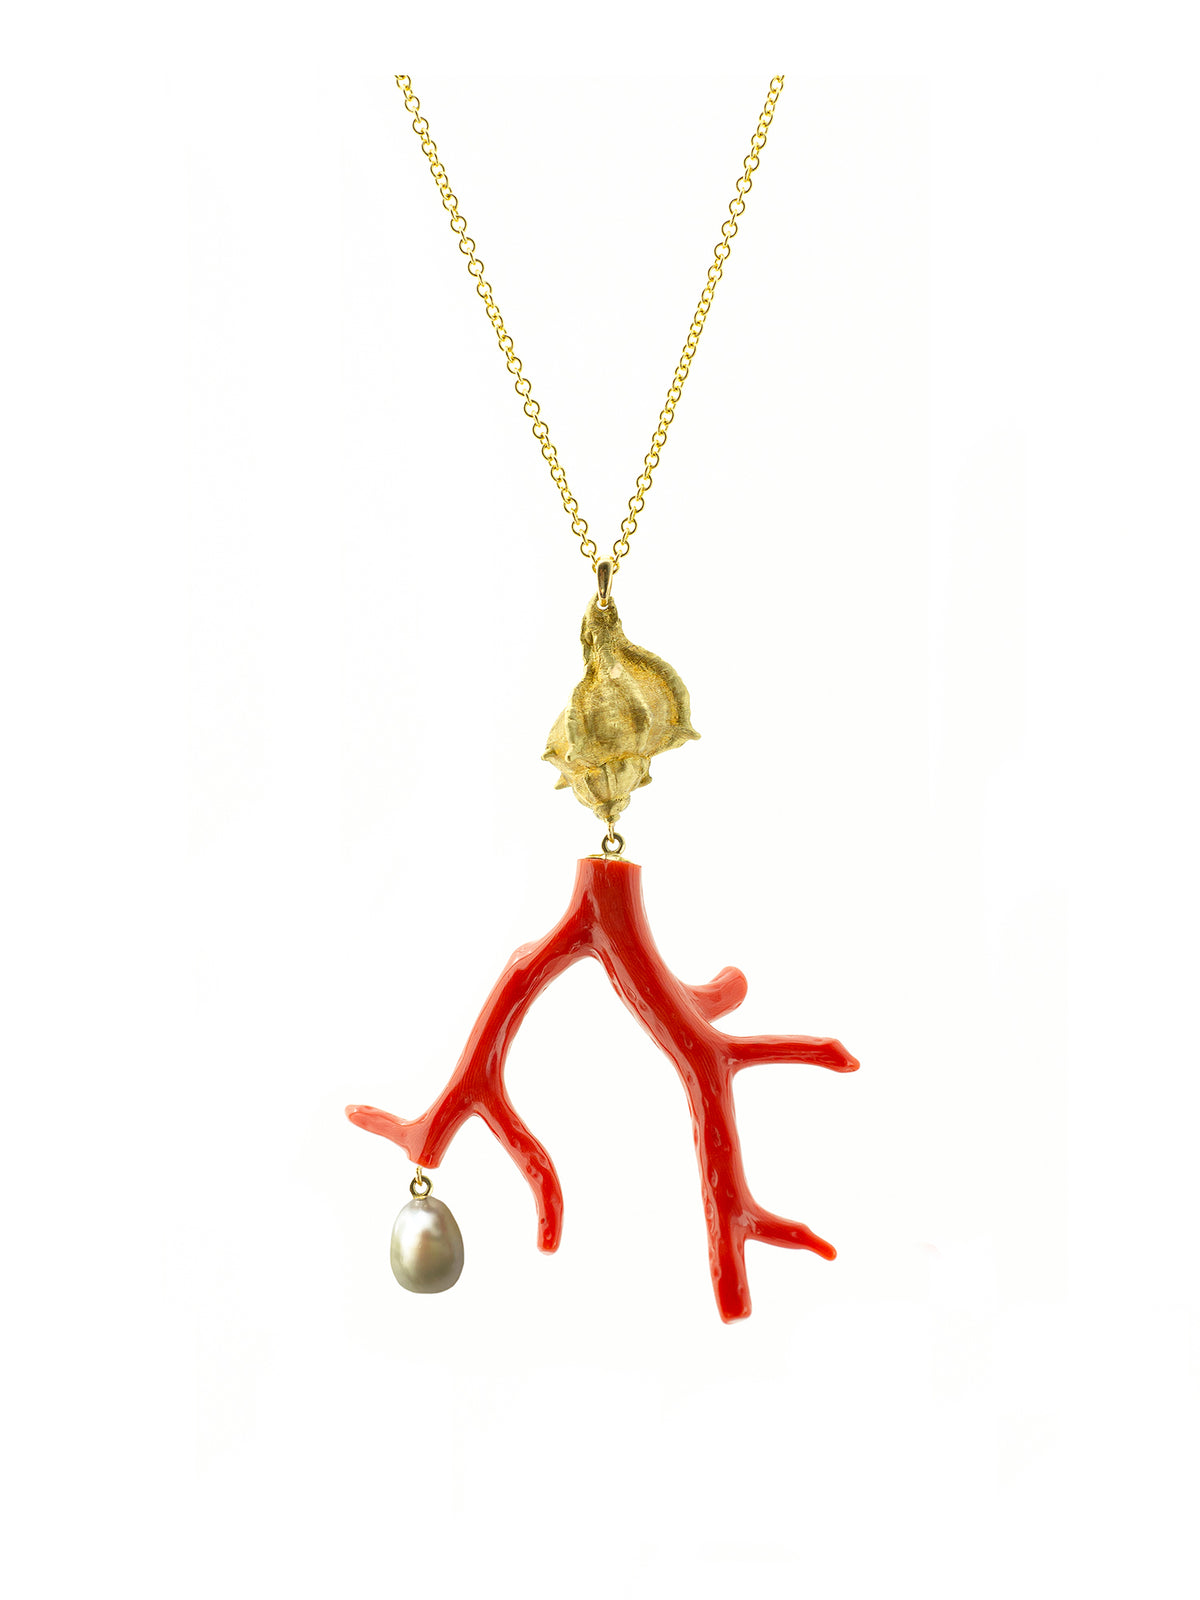 Coral pendant: a treasure of the sea that you can wear